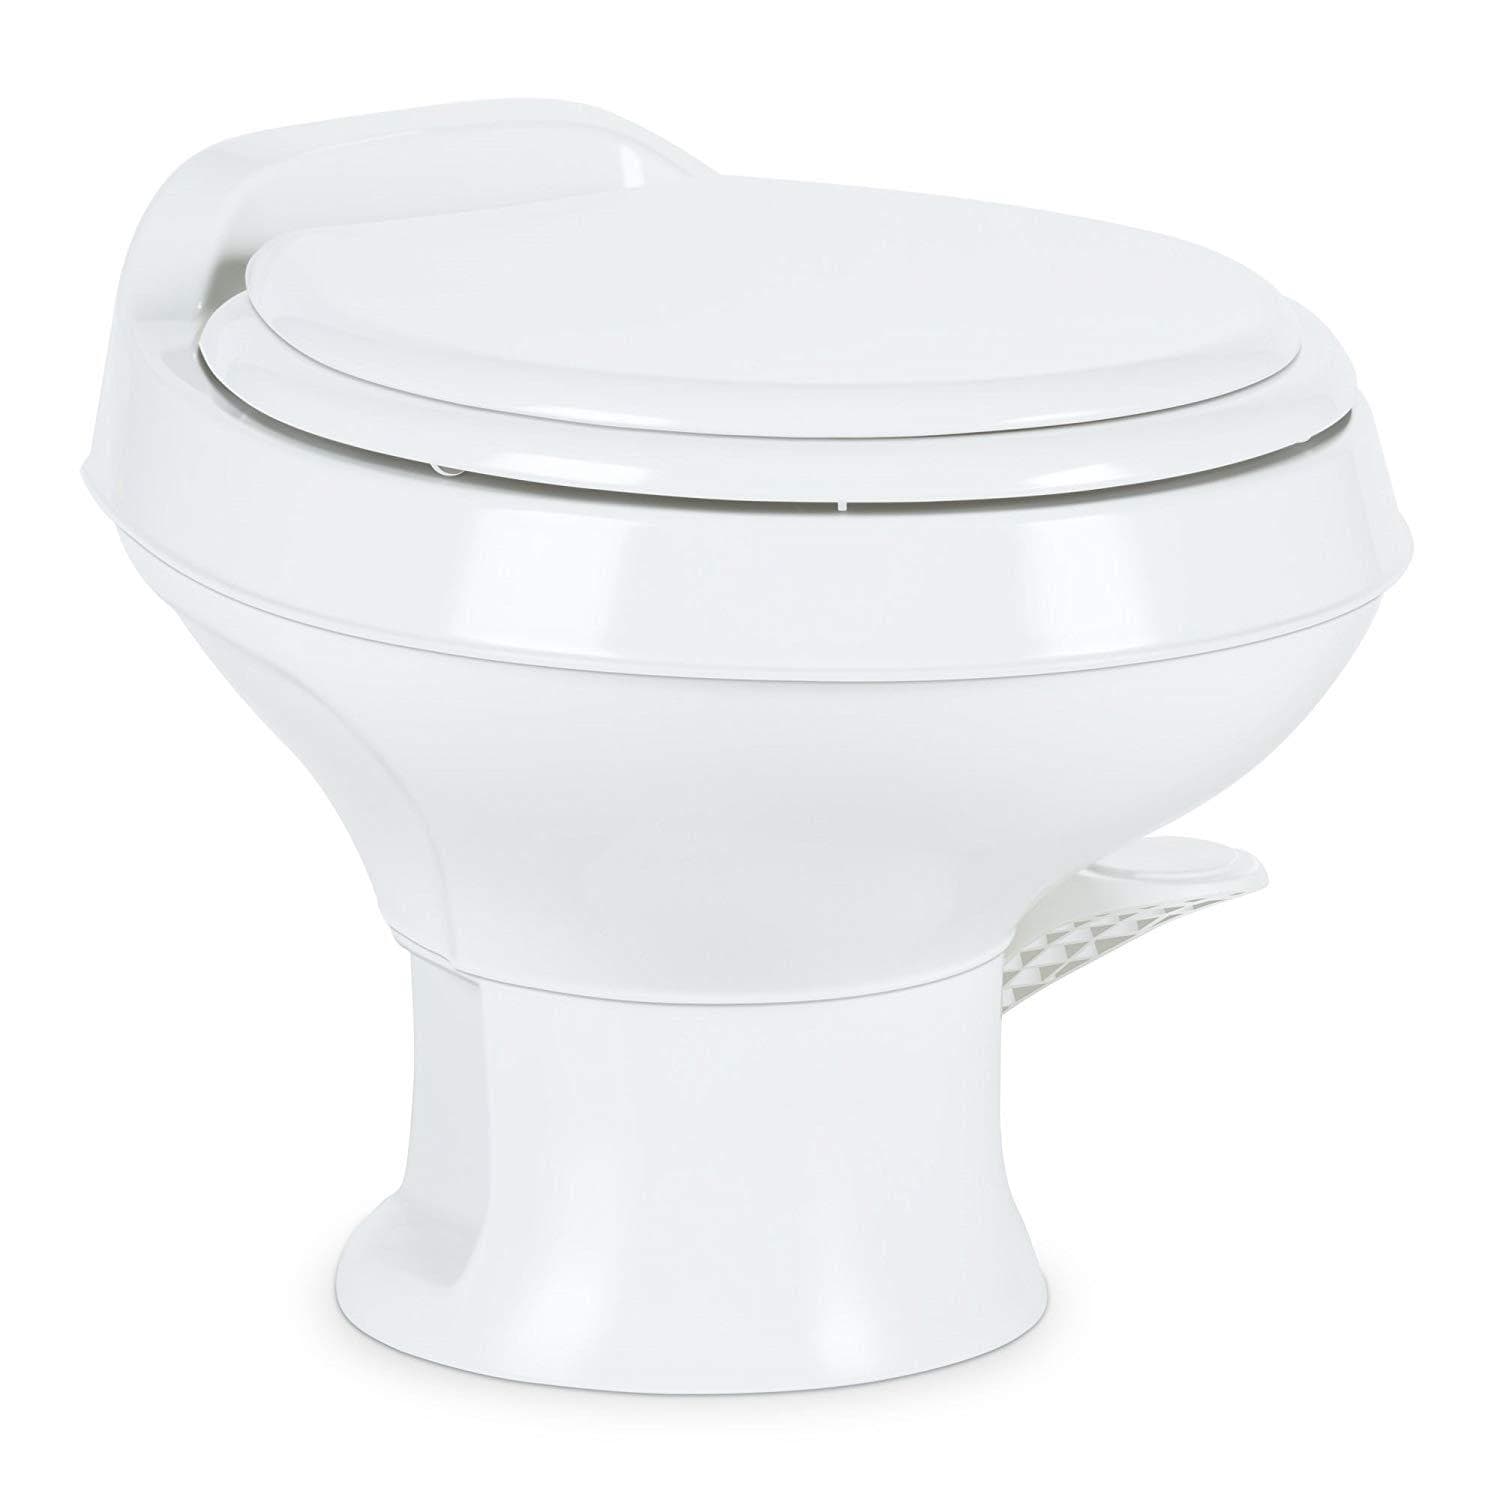 Dometic 302301771 300 Series White Low Profile Toilet with Hand Spray